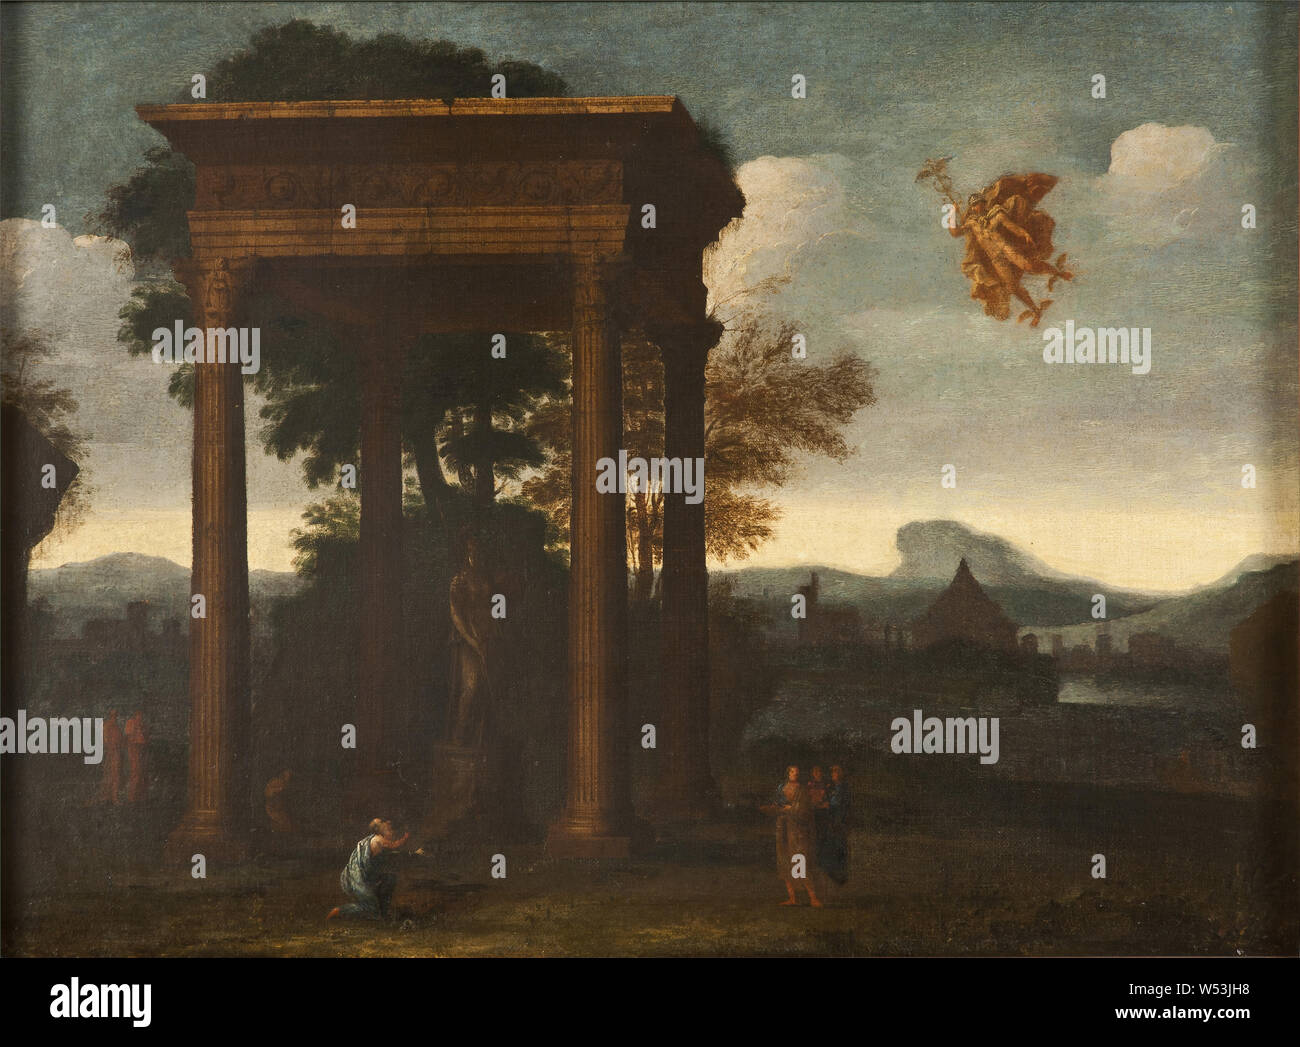 Attributed to Agostino Tassi, Landscape with Open Portico and Flying Mercury, Landscape with open portico and flying Mercury, painting, landscape art, 17th century, oil on canvas, Height, 55.5 cm (21.8 inches), Width, 80 cm, (31.4 inches) Stock Photo